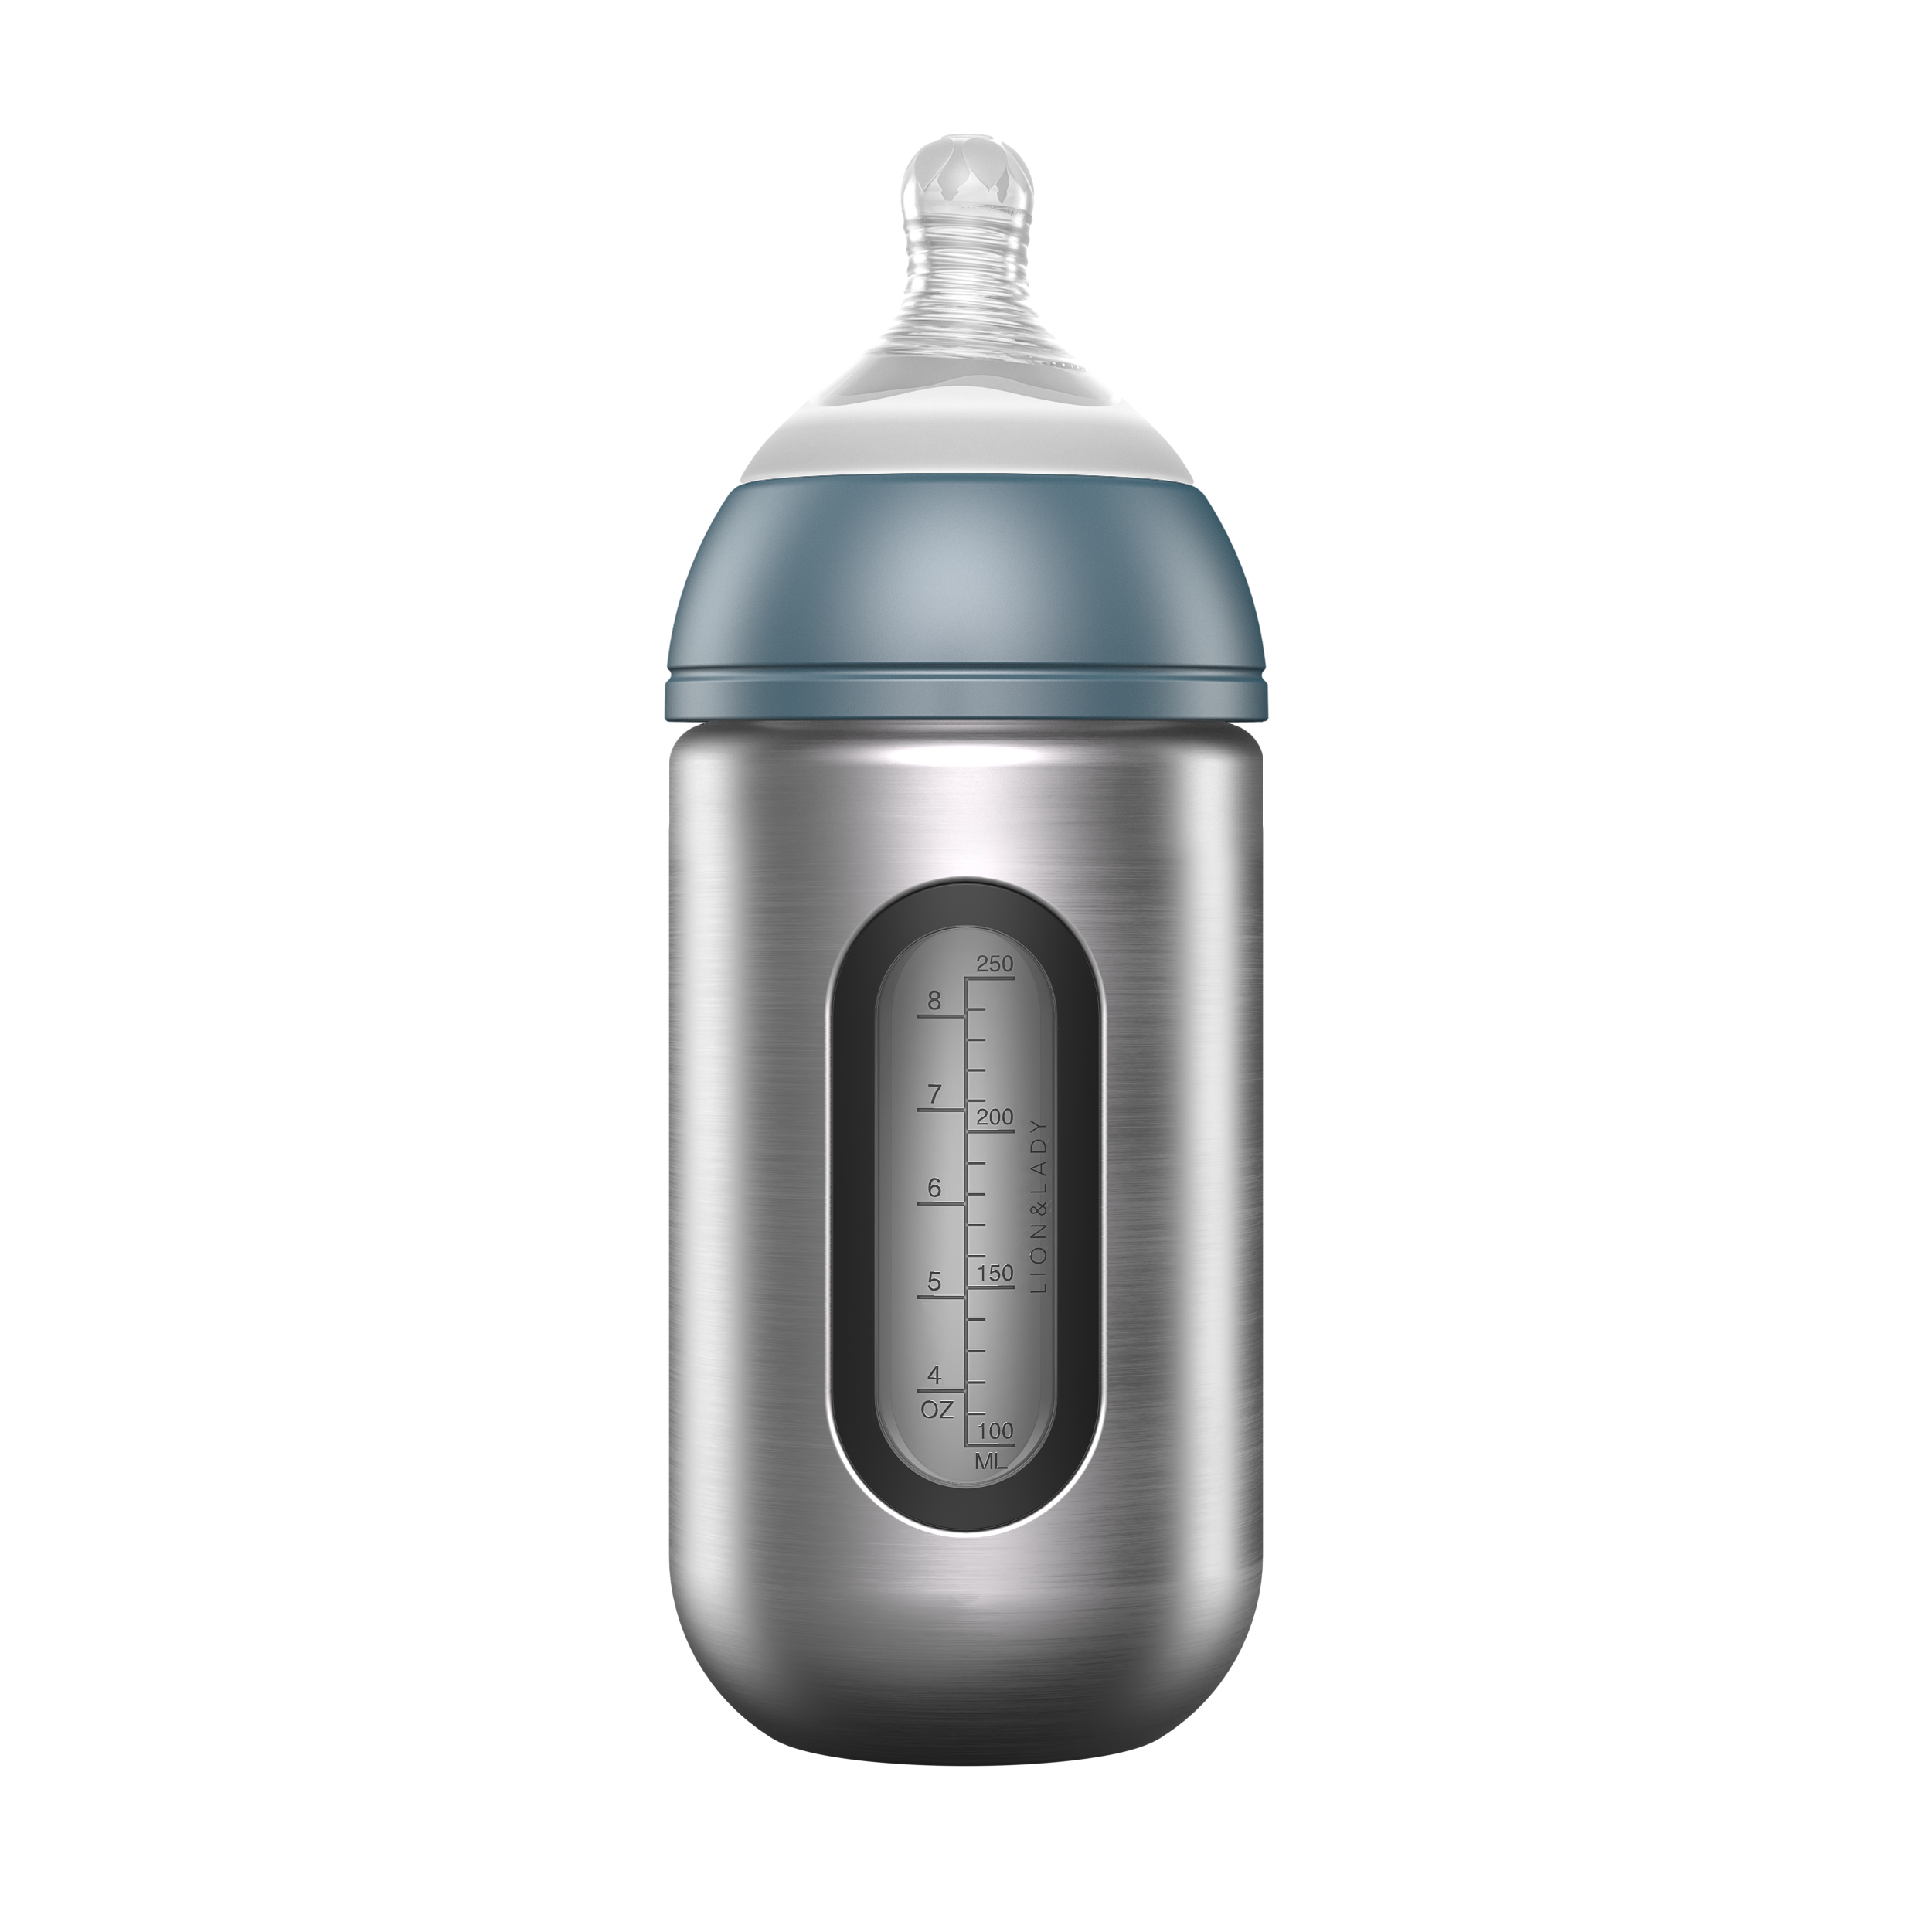 18/8 Stainless Steel Baby Bottle with PPSU measuring window - 350ml